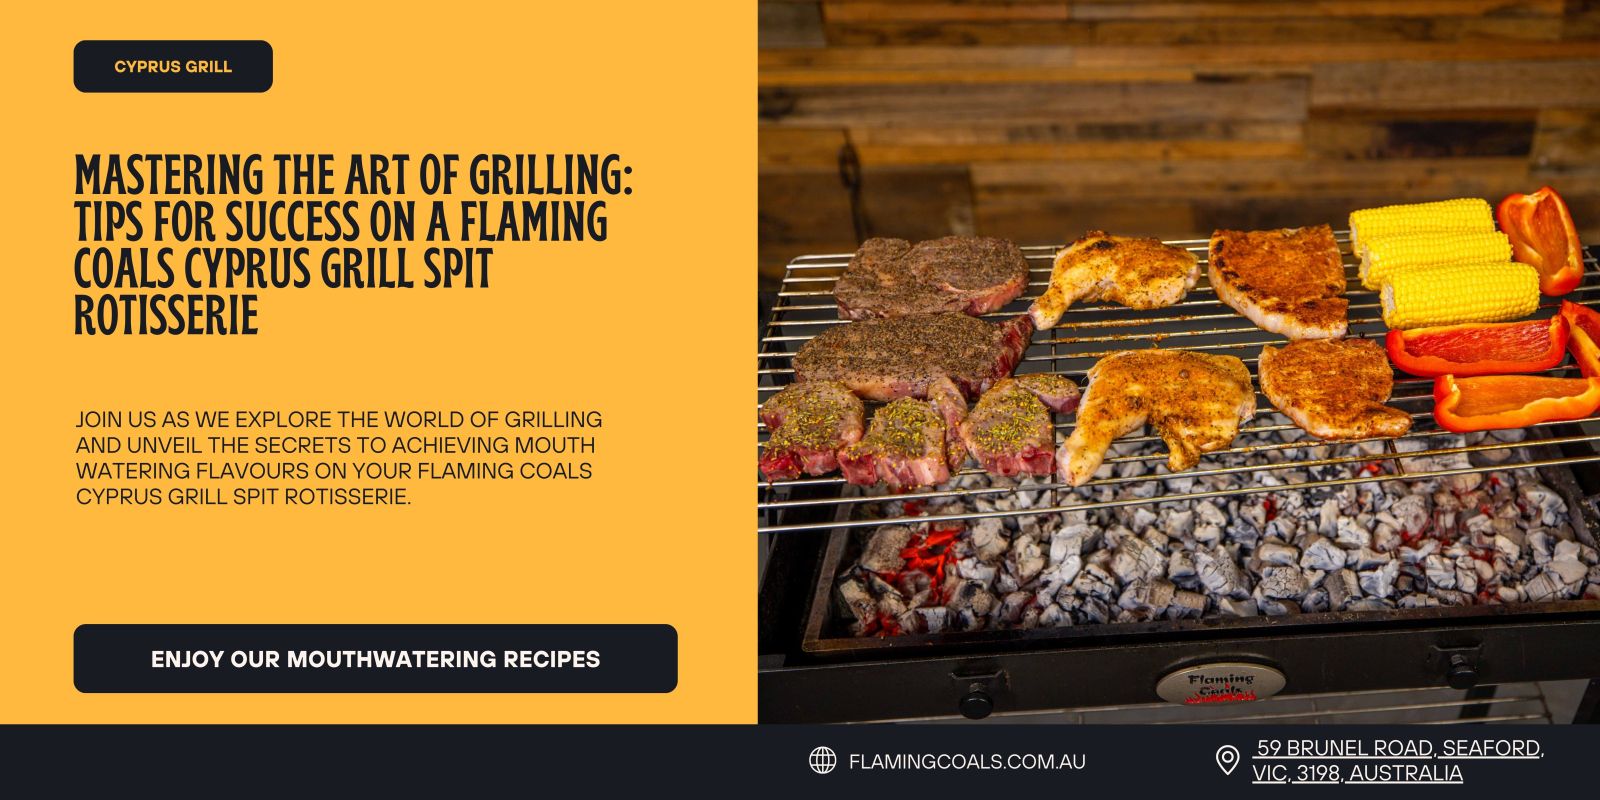 This_image_shows_different_types_of_meat_being_grilled_on_cyprus_Spit